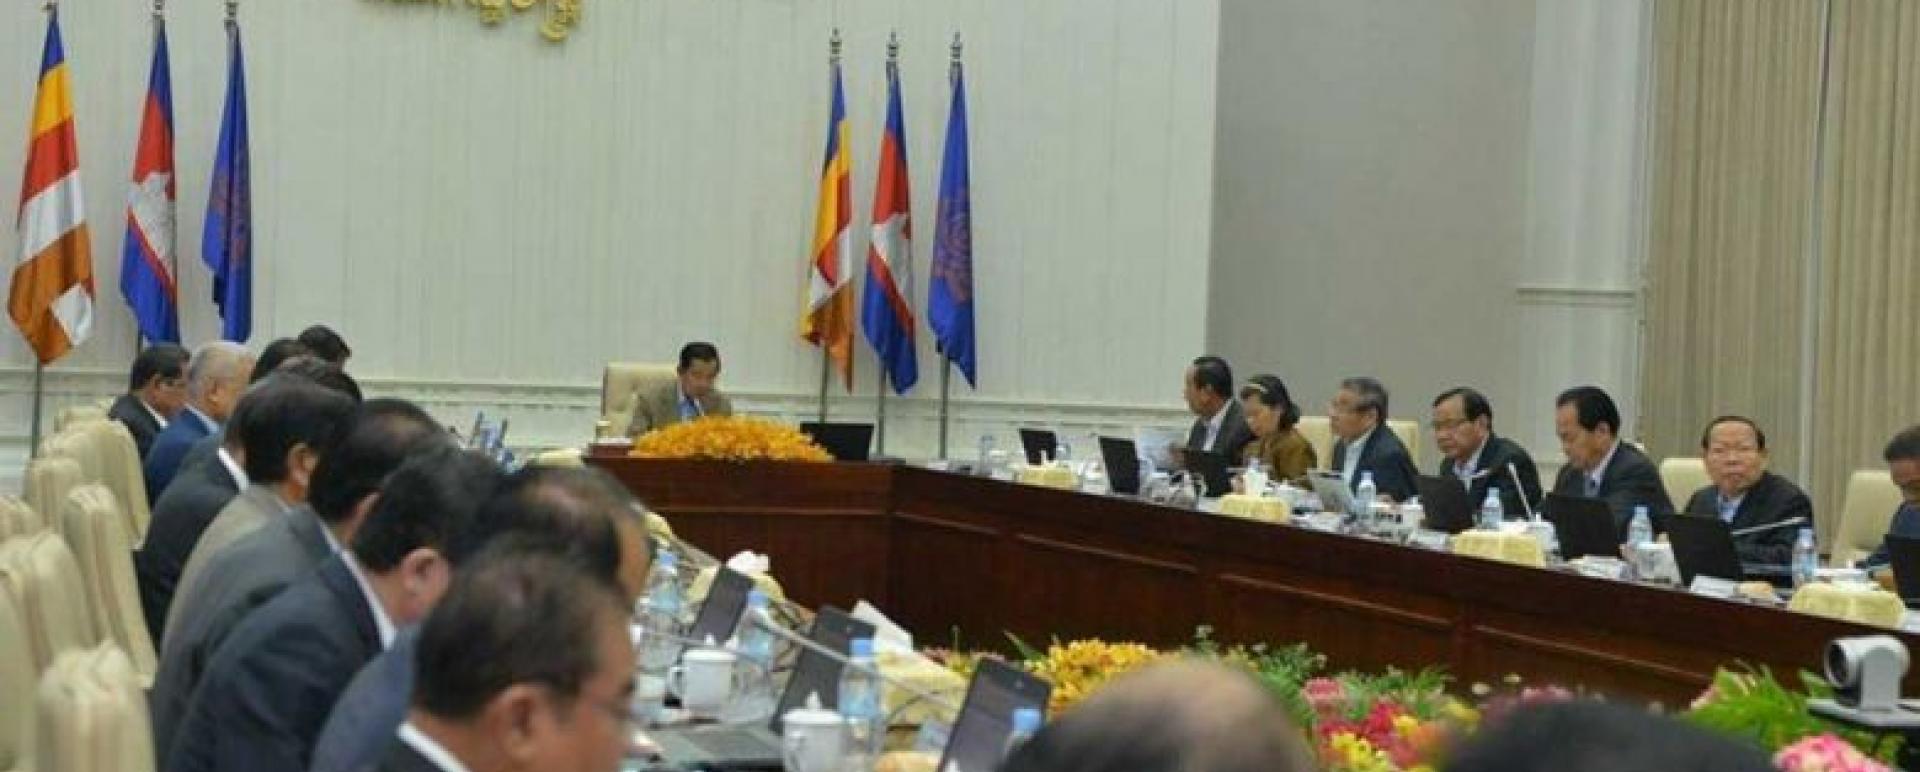 Prime Minister Hun Sen chairs a plenary meeting of the Council of Ministers at the Peace Palace on Friday where the council approved two coal-fired power plant projects and a transmission line worth nearly $1.7 billion. FRESH NEWS